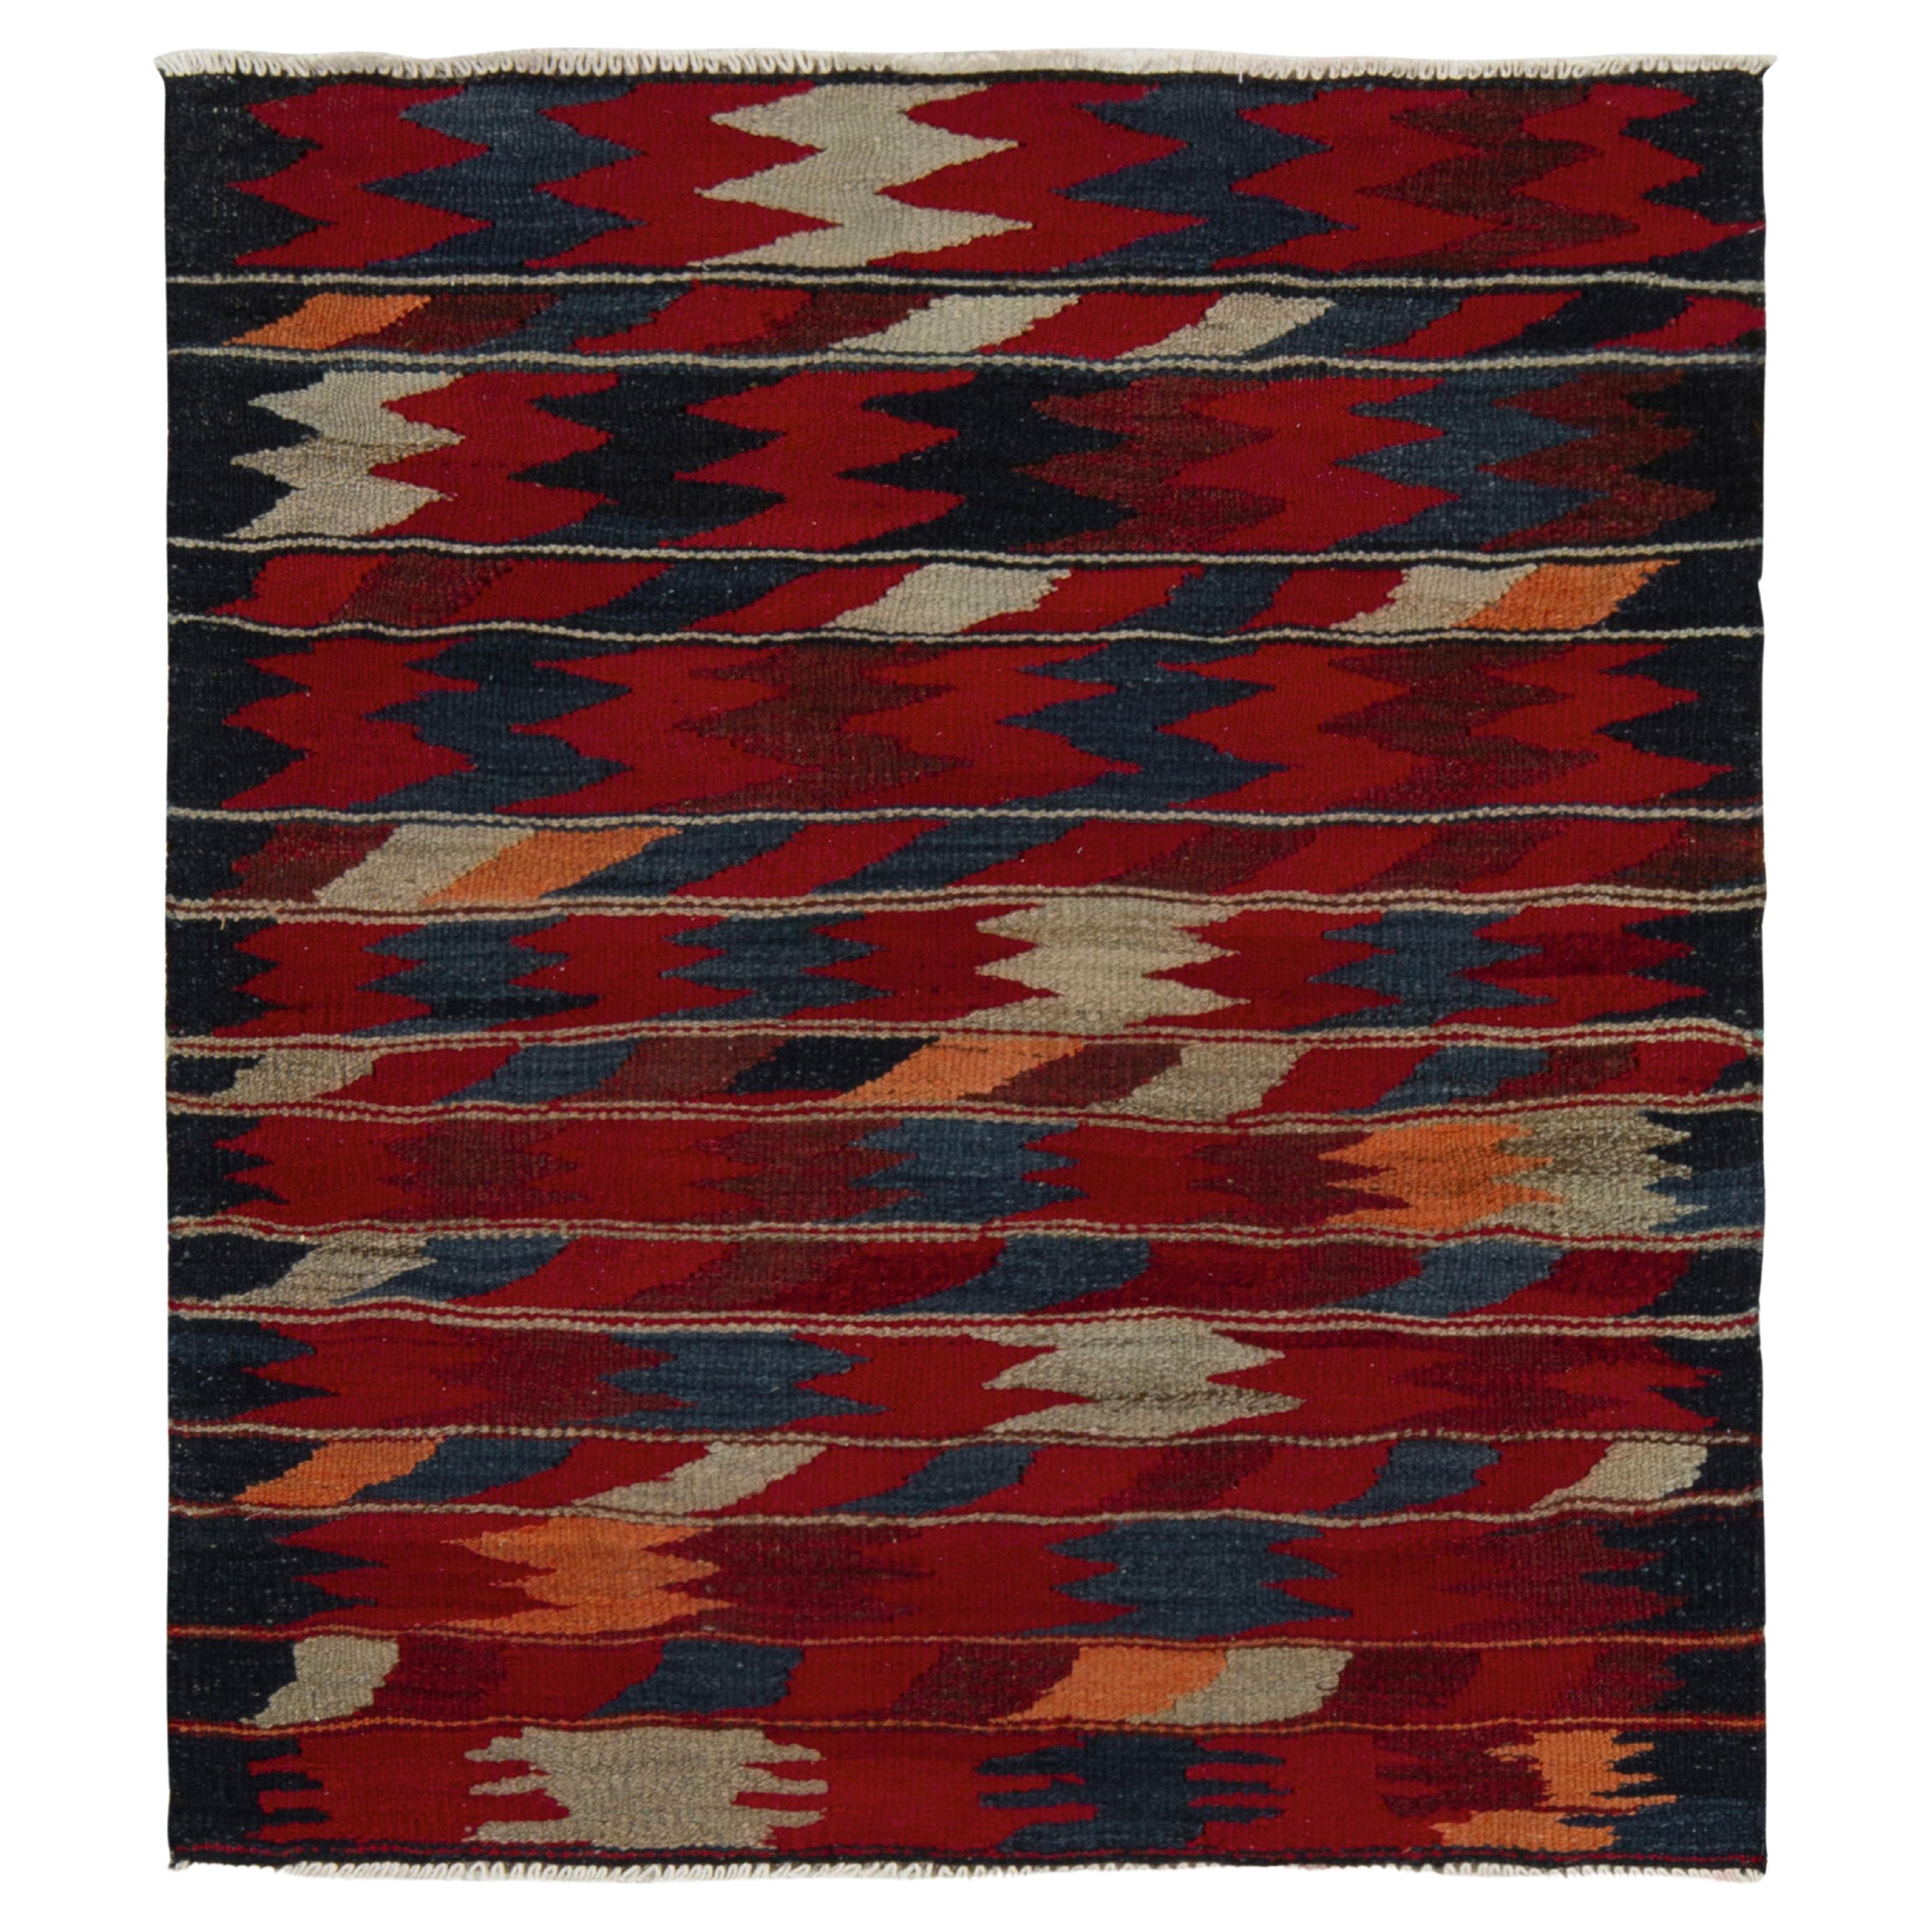 Vintage Sofreh Kilim Rug in Red, Blue, Colorful Geometric Pattern by Rug & Kilim For Sale